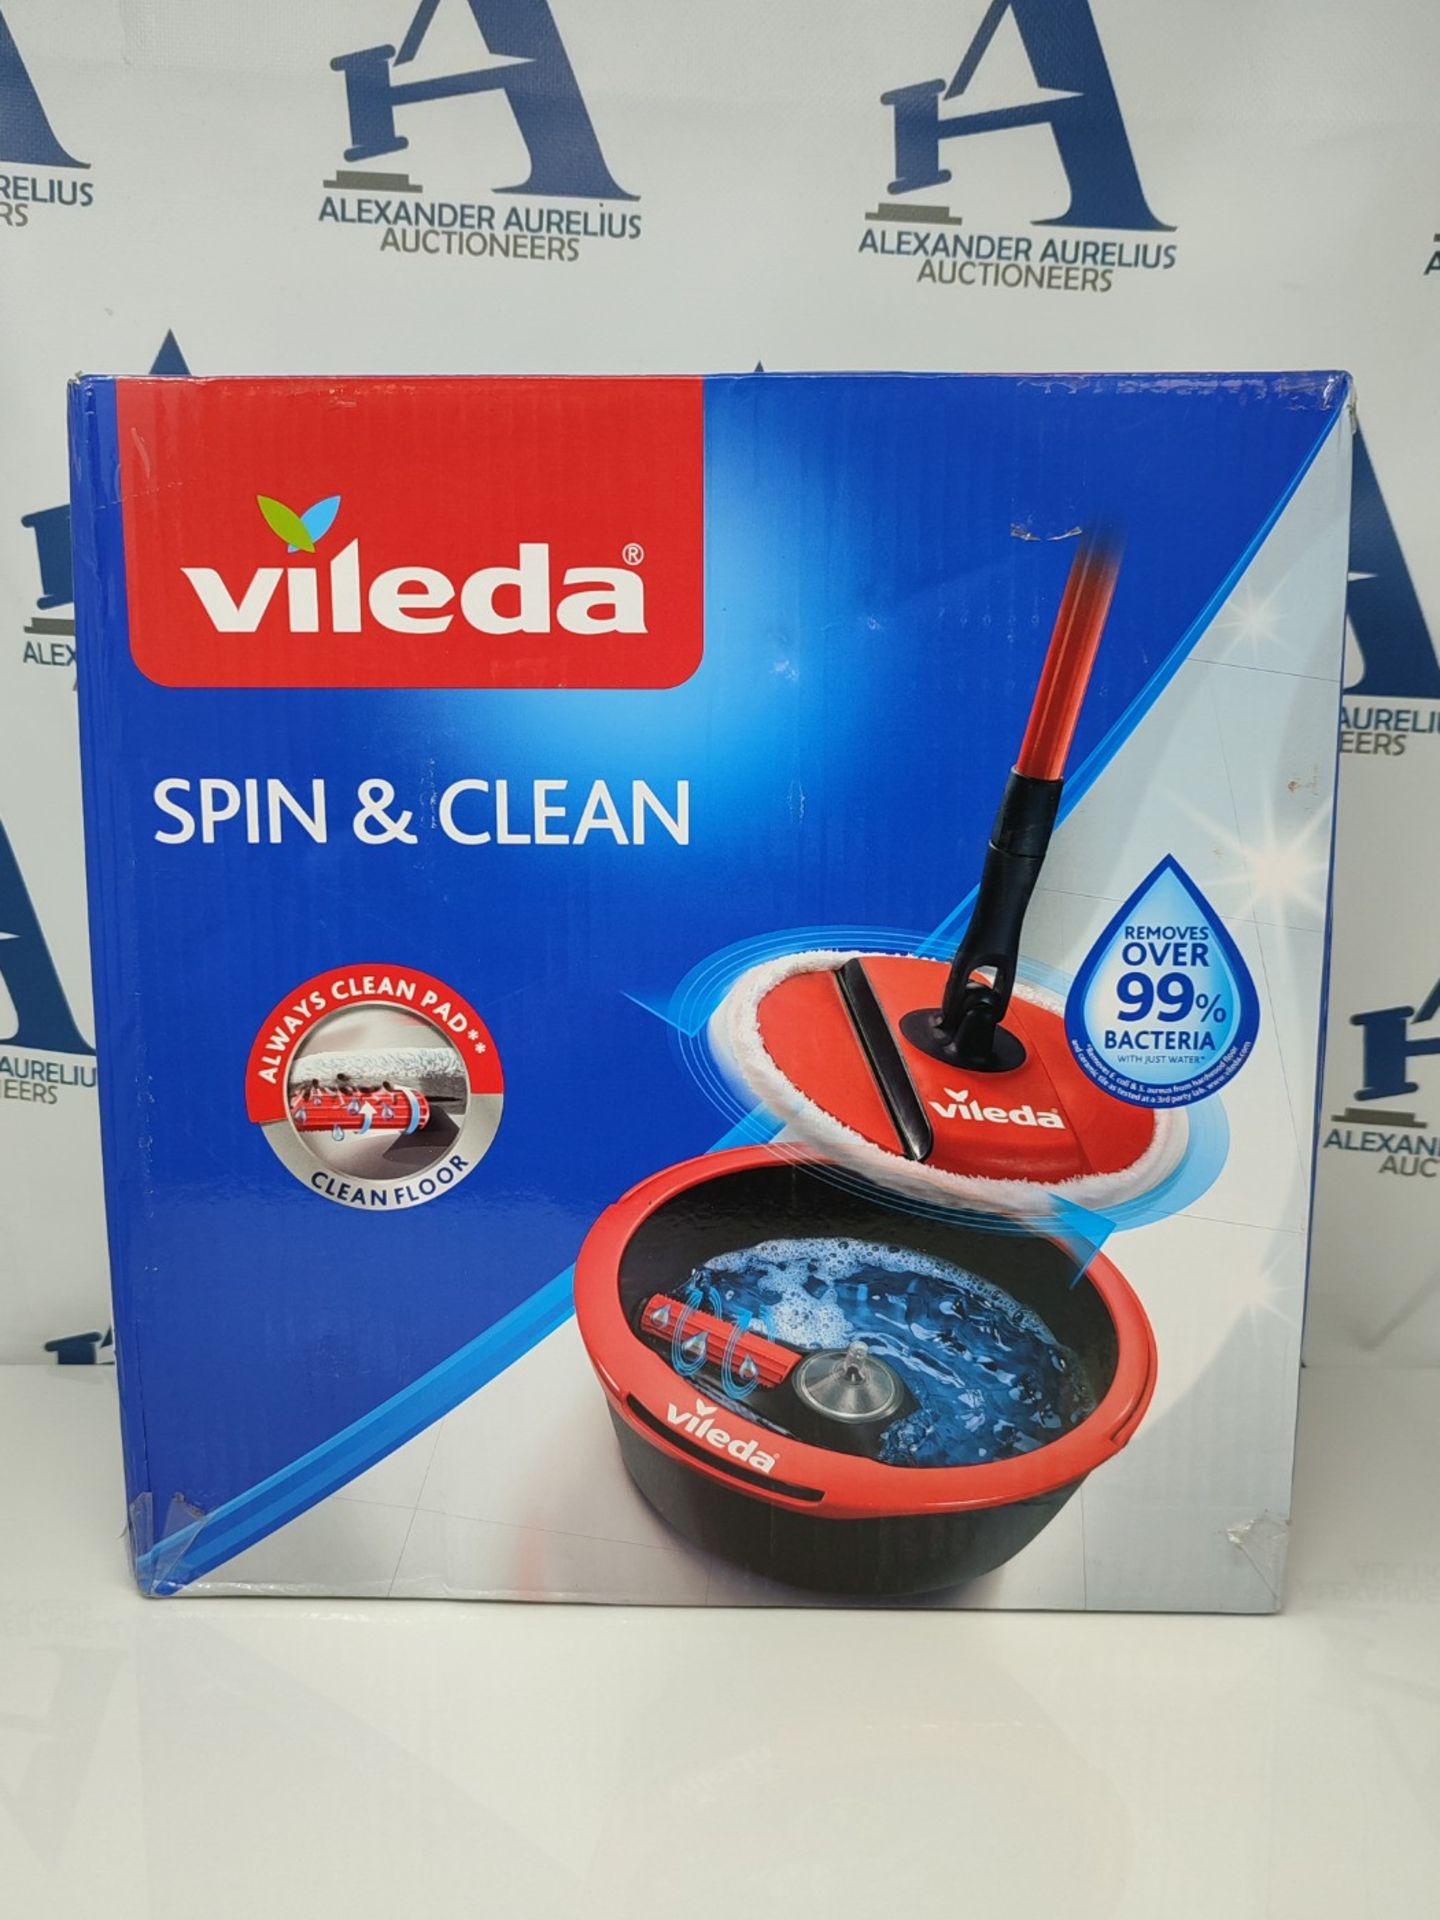 Vileda Spin and Clean Floor Mop and Bucket Set, Spin Mop for Cleaning Floors, Set of 1 - Image 2 of 3